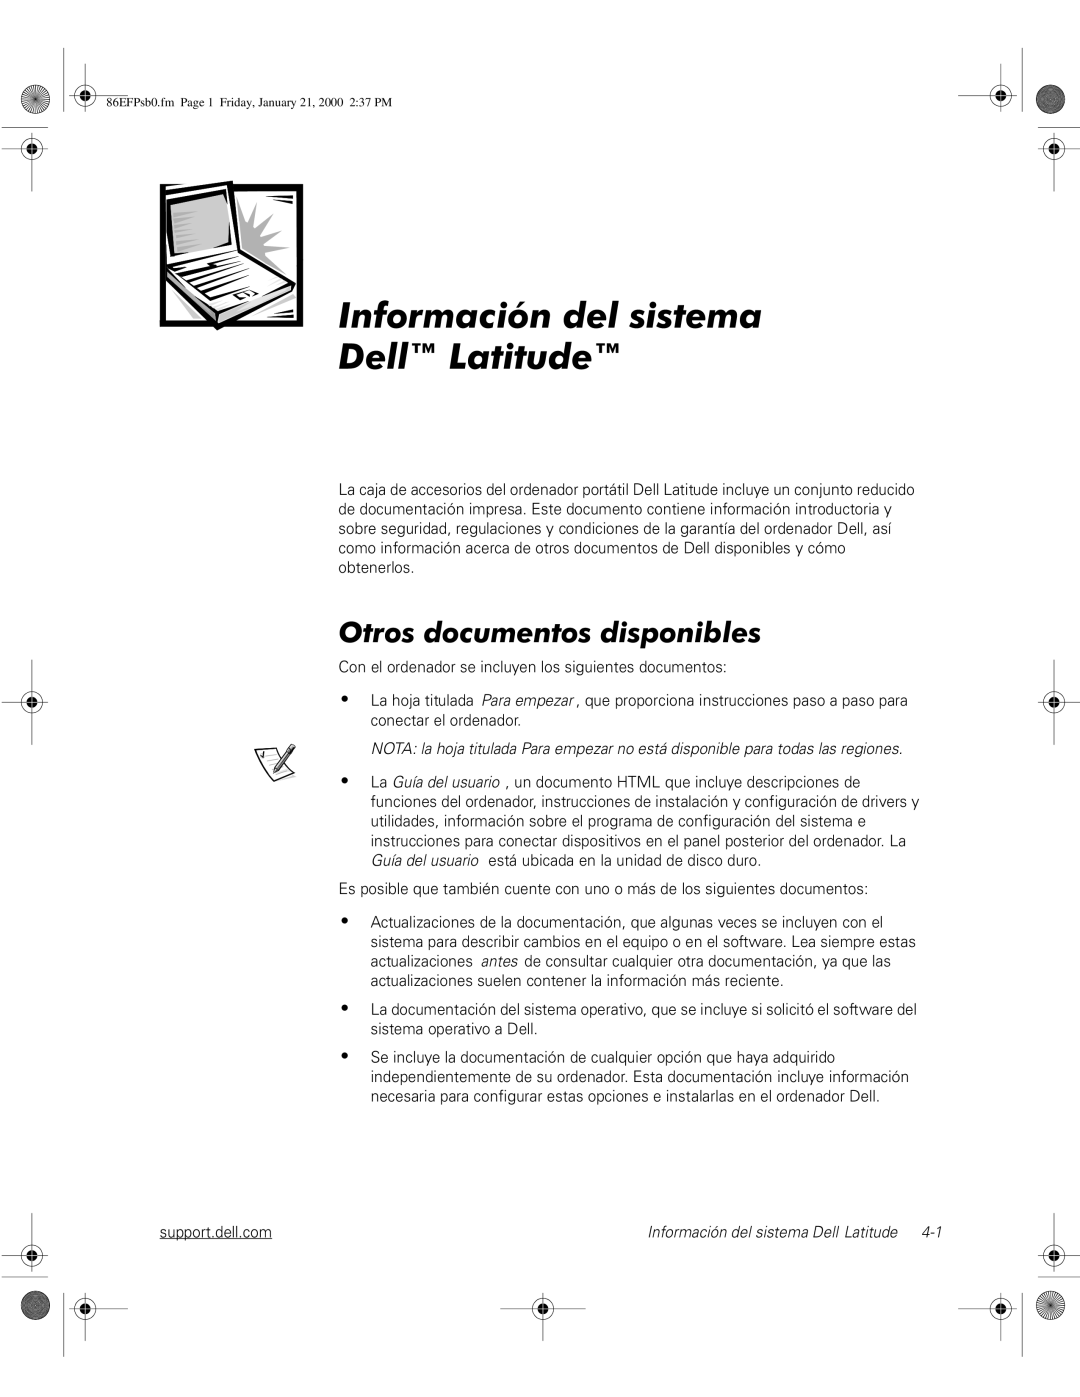 Dell PPX manual QIRUPDFLyQGHOVLVWHPD HOOŒ /DWLWXGHŒ, 2WURVGRFXPHQWRVGLVSRQLEOHV, DELL CONFIDENCIAL - Preliminar 1/21/00 